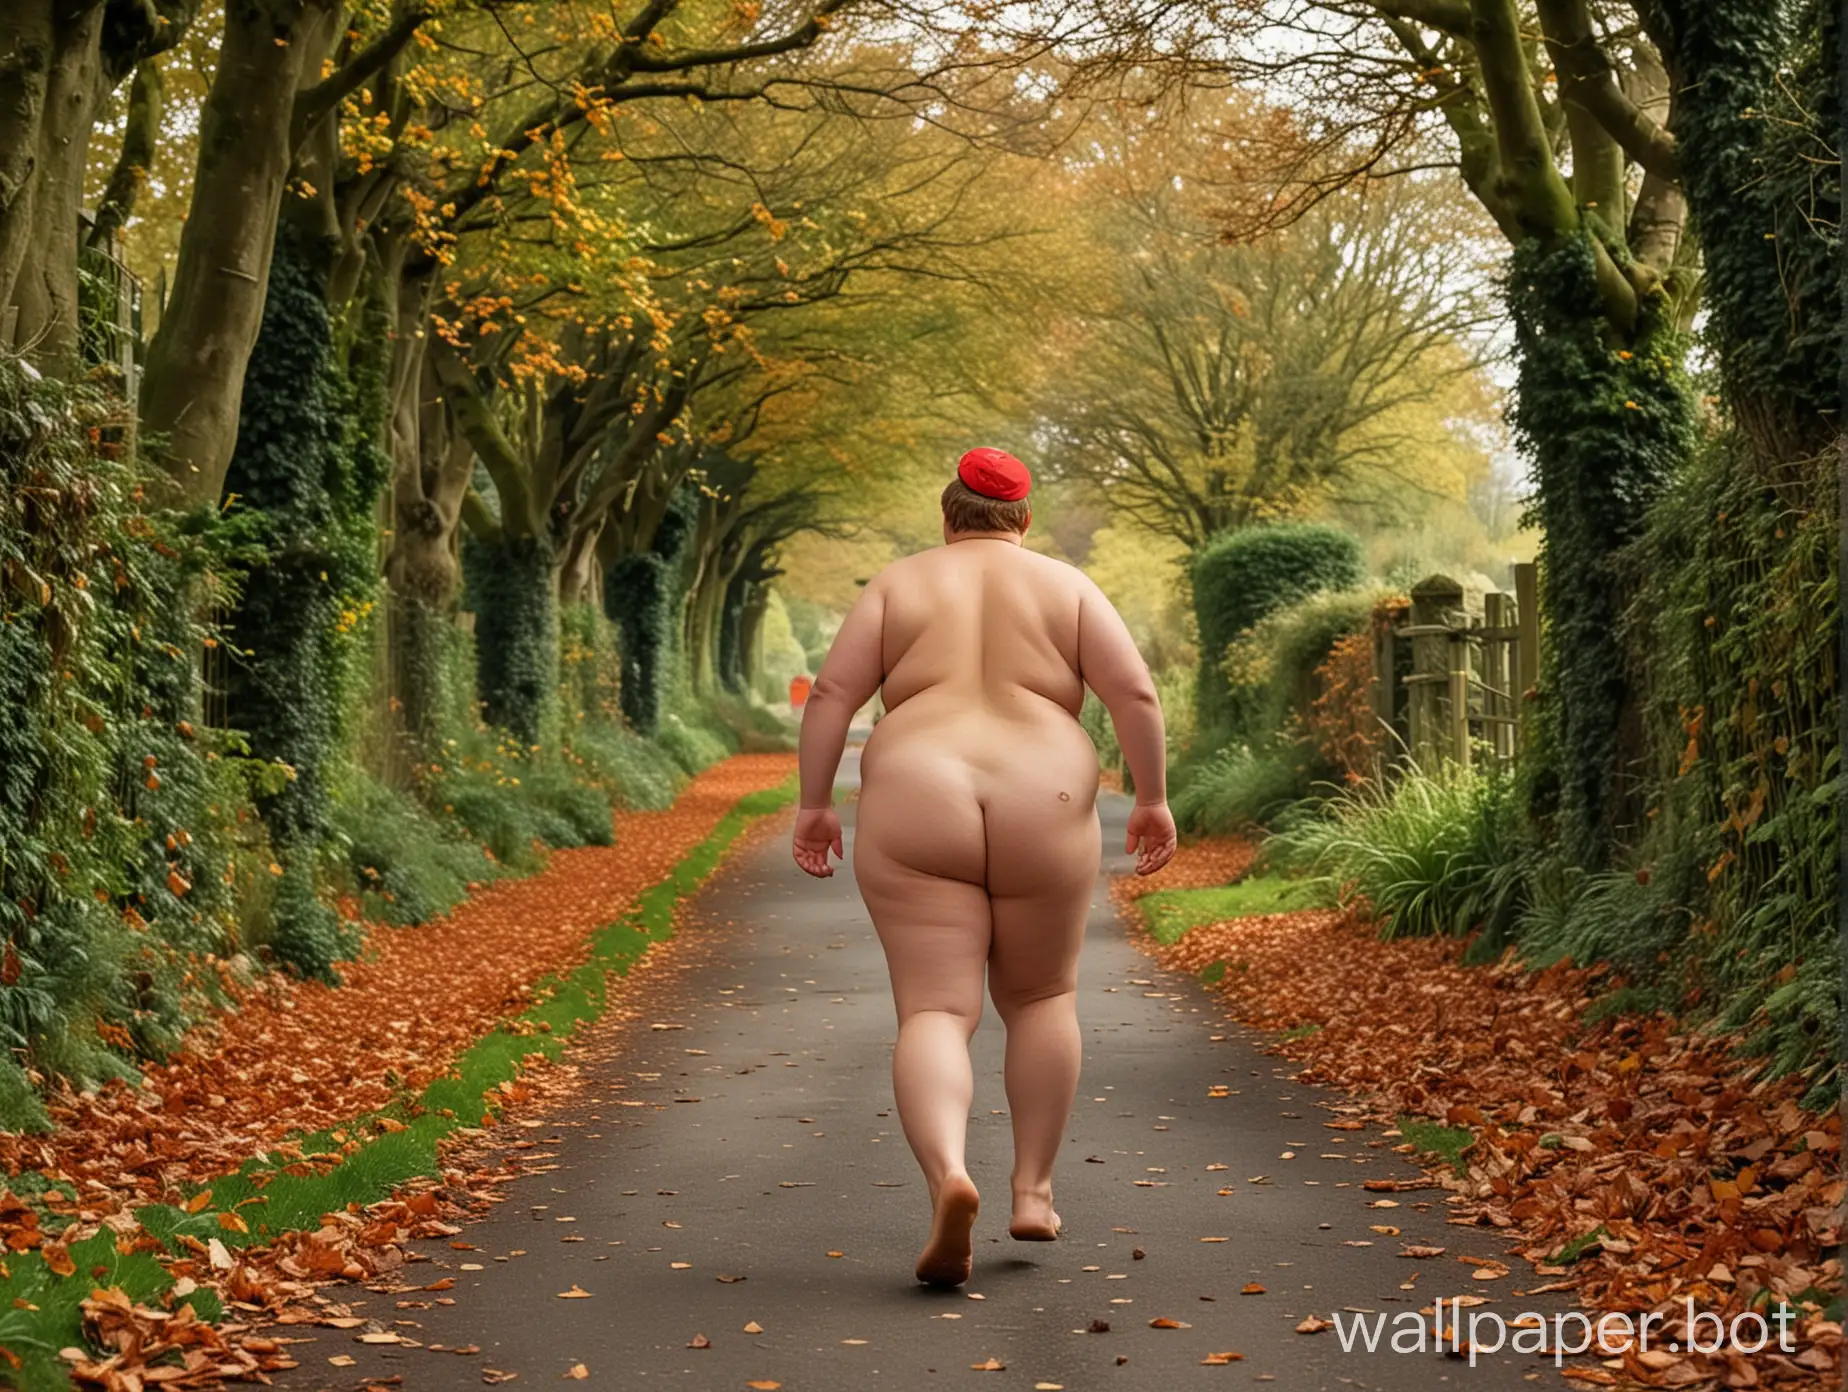 A naked chubby jogger, seen from behind, as he runs down a picturesque English lane. The lane is lined with vibrant, lush green trees, and the ground is covered with a beautiful blanket of autumn leaves. The jogger is totally naked except for a red headband.